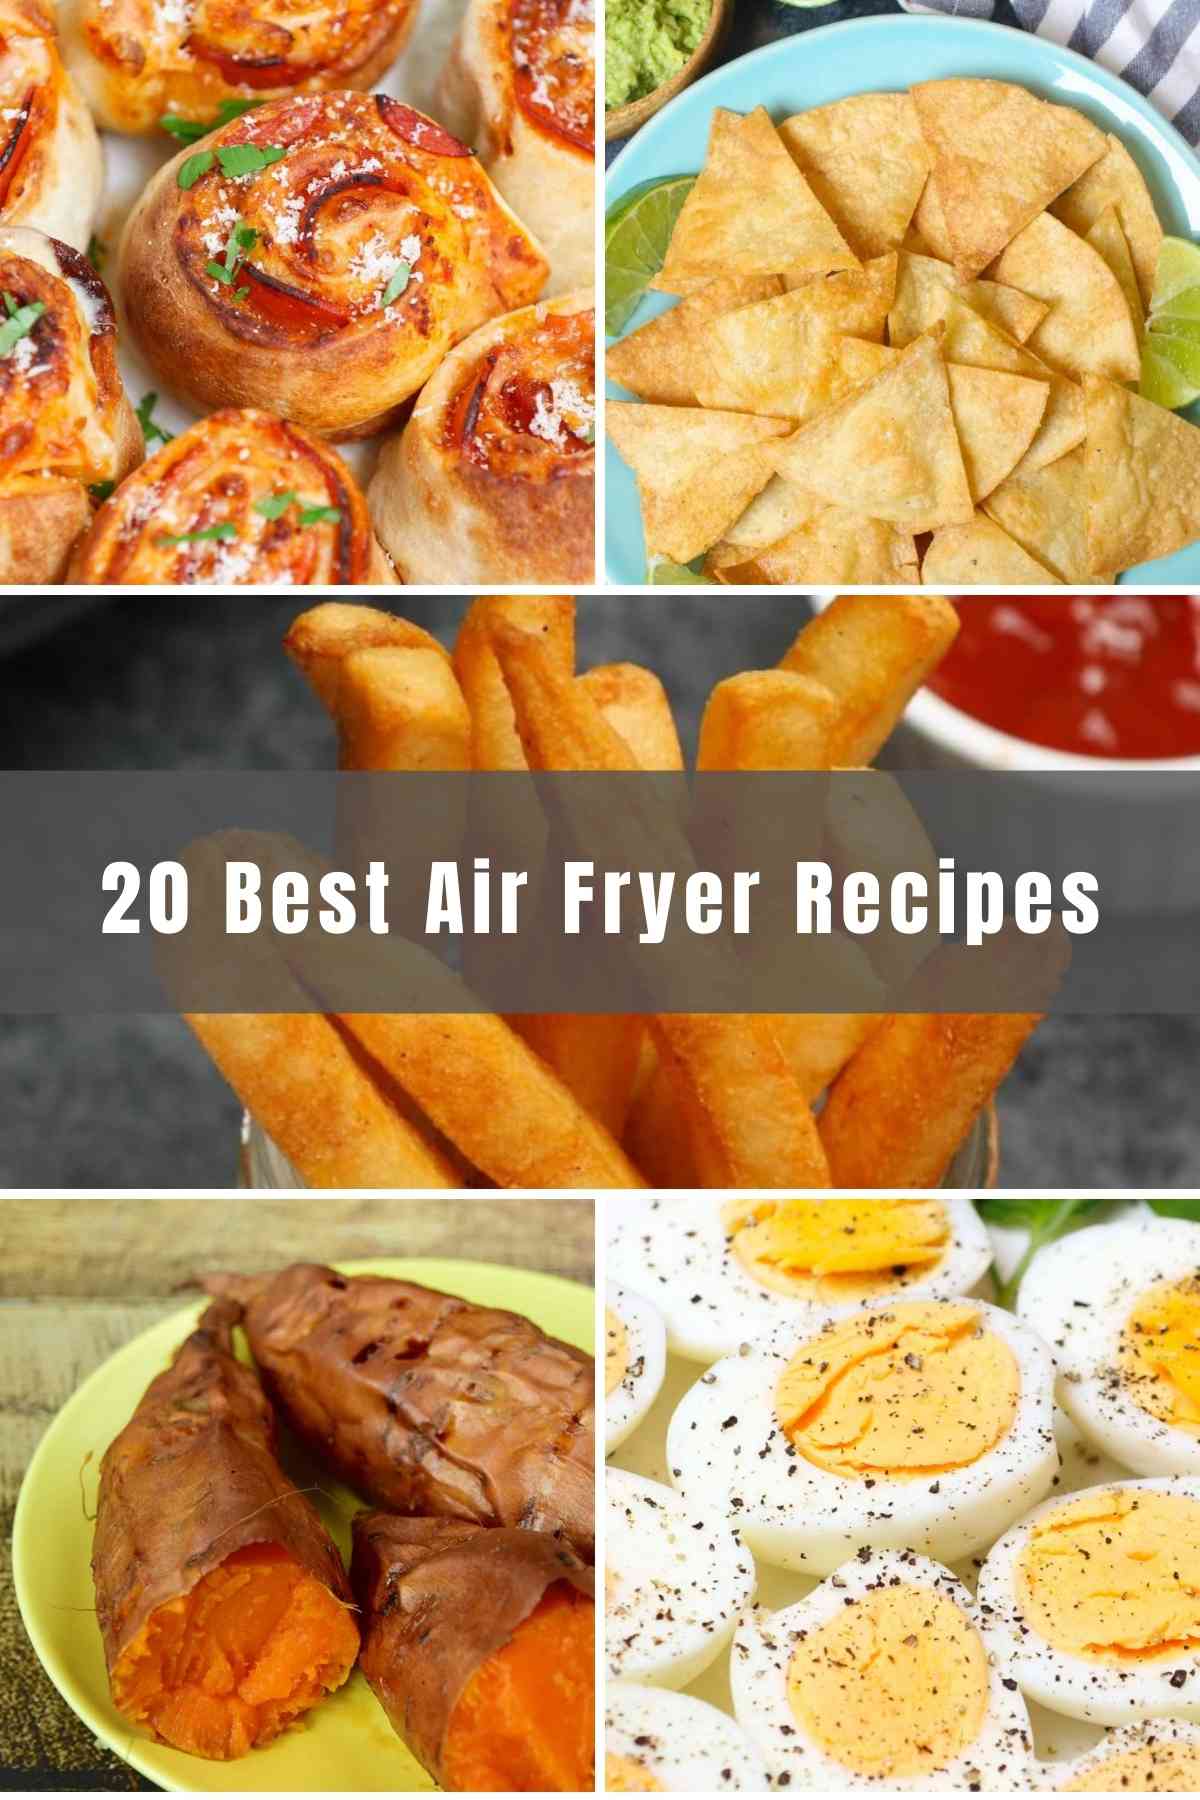 On busy mornings, an air fryer is your best friend for a healthier and faster meal. We’ve rounded up 20 of the Best Air Fryer Breakfast Recipes from hard-boiled eggs to burritos and donuts! With this handy device, you can make a filling, satisfying breakfast in minutes.